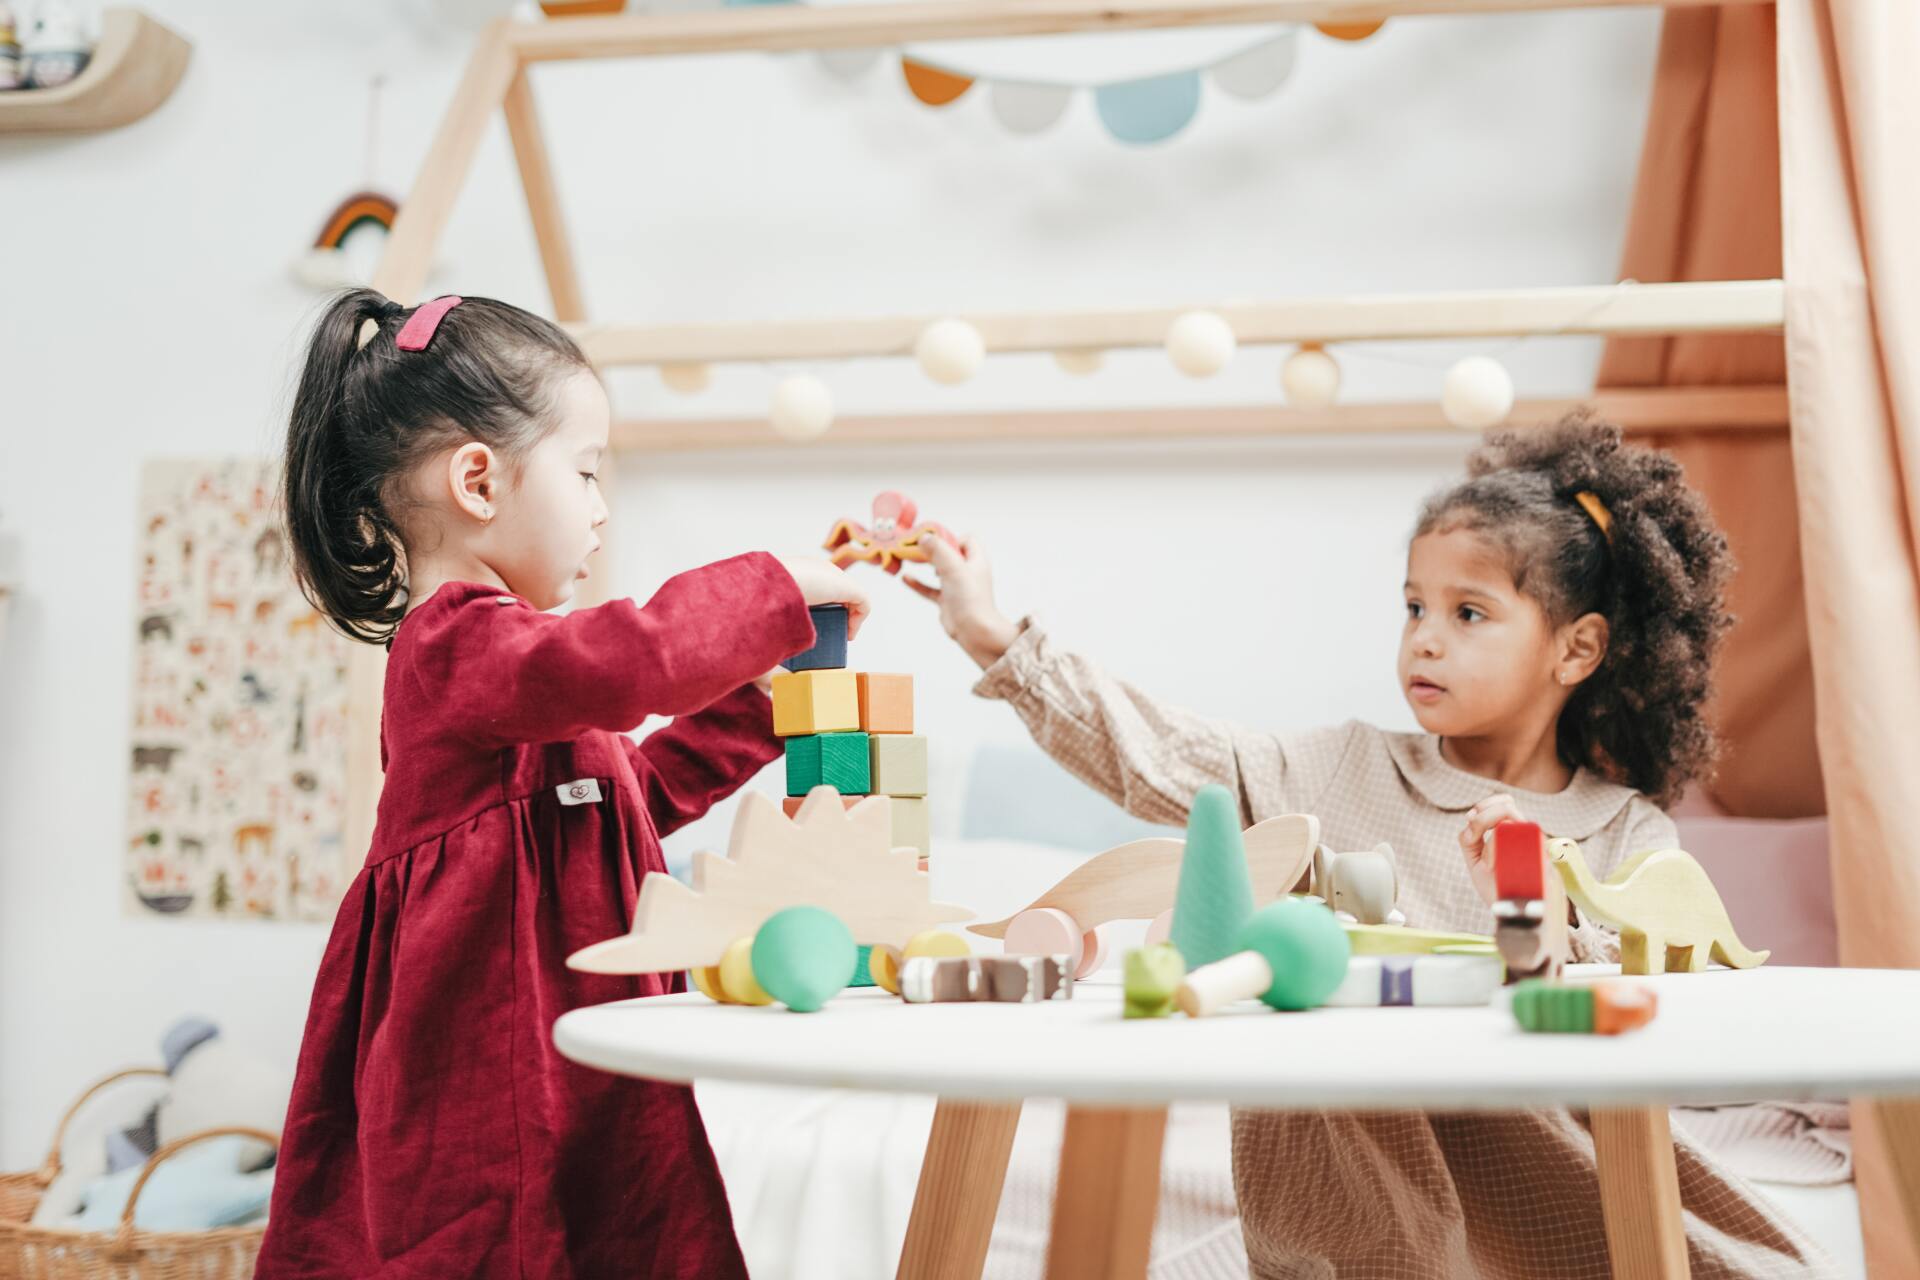 Two little girls are playing with wooden blocks at a table.